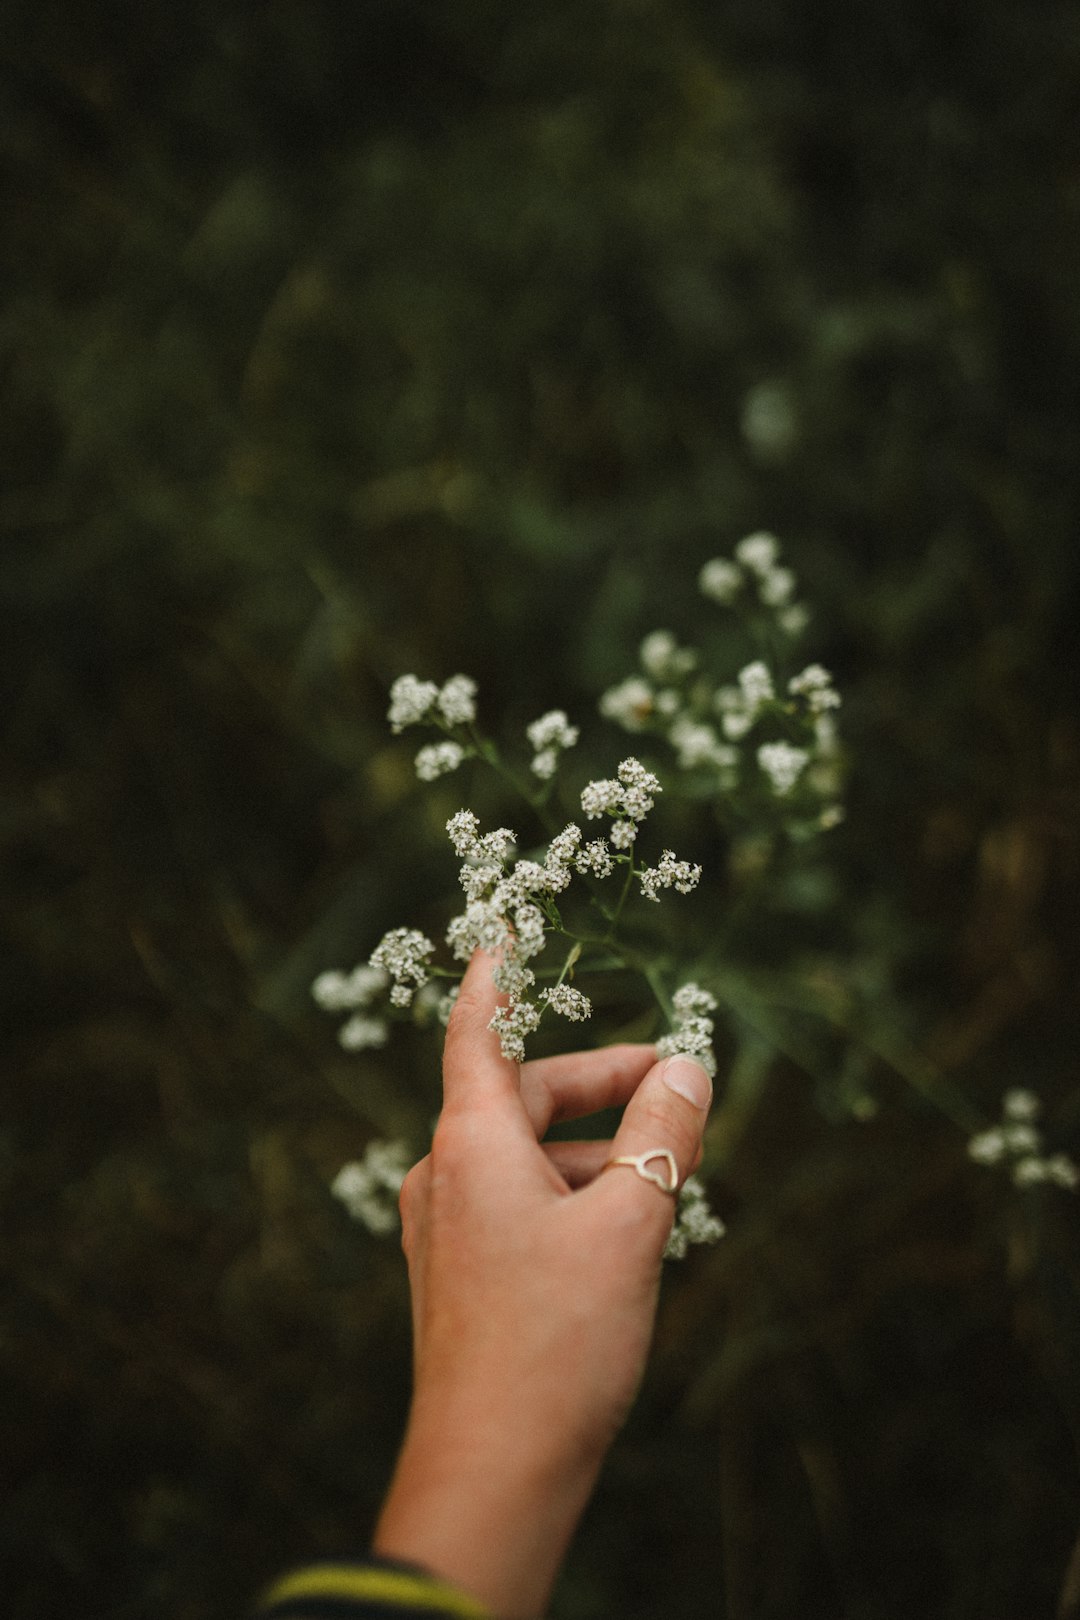 person holding white flower during daytime